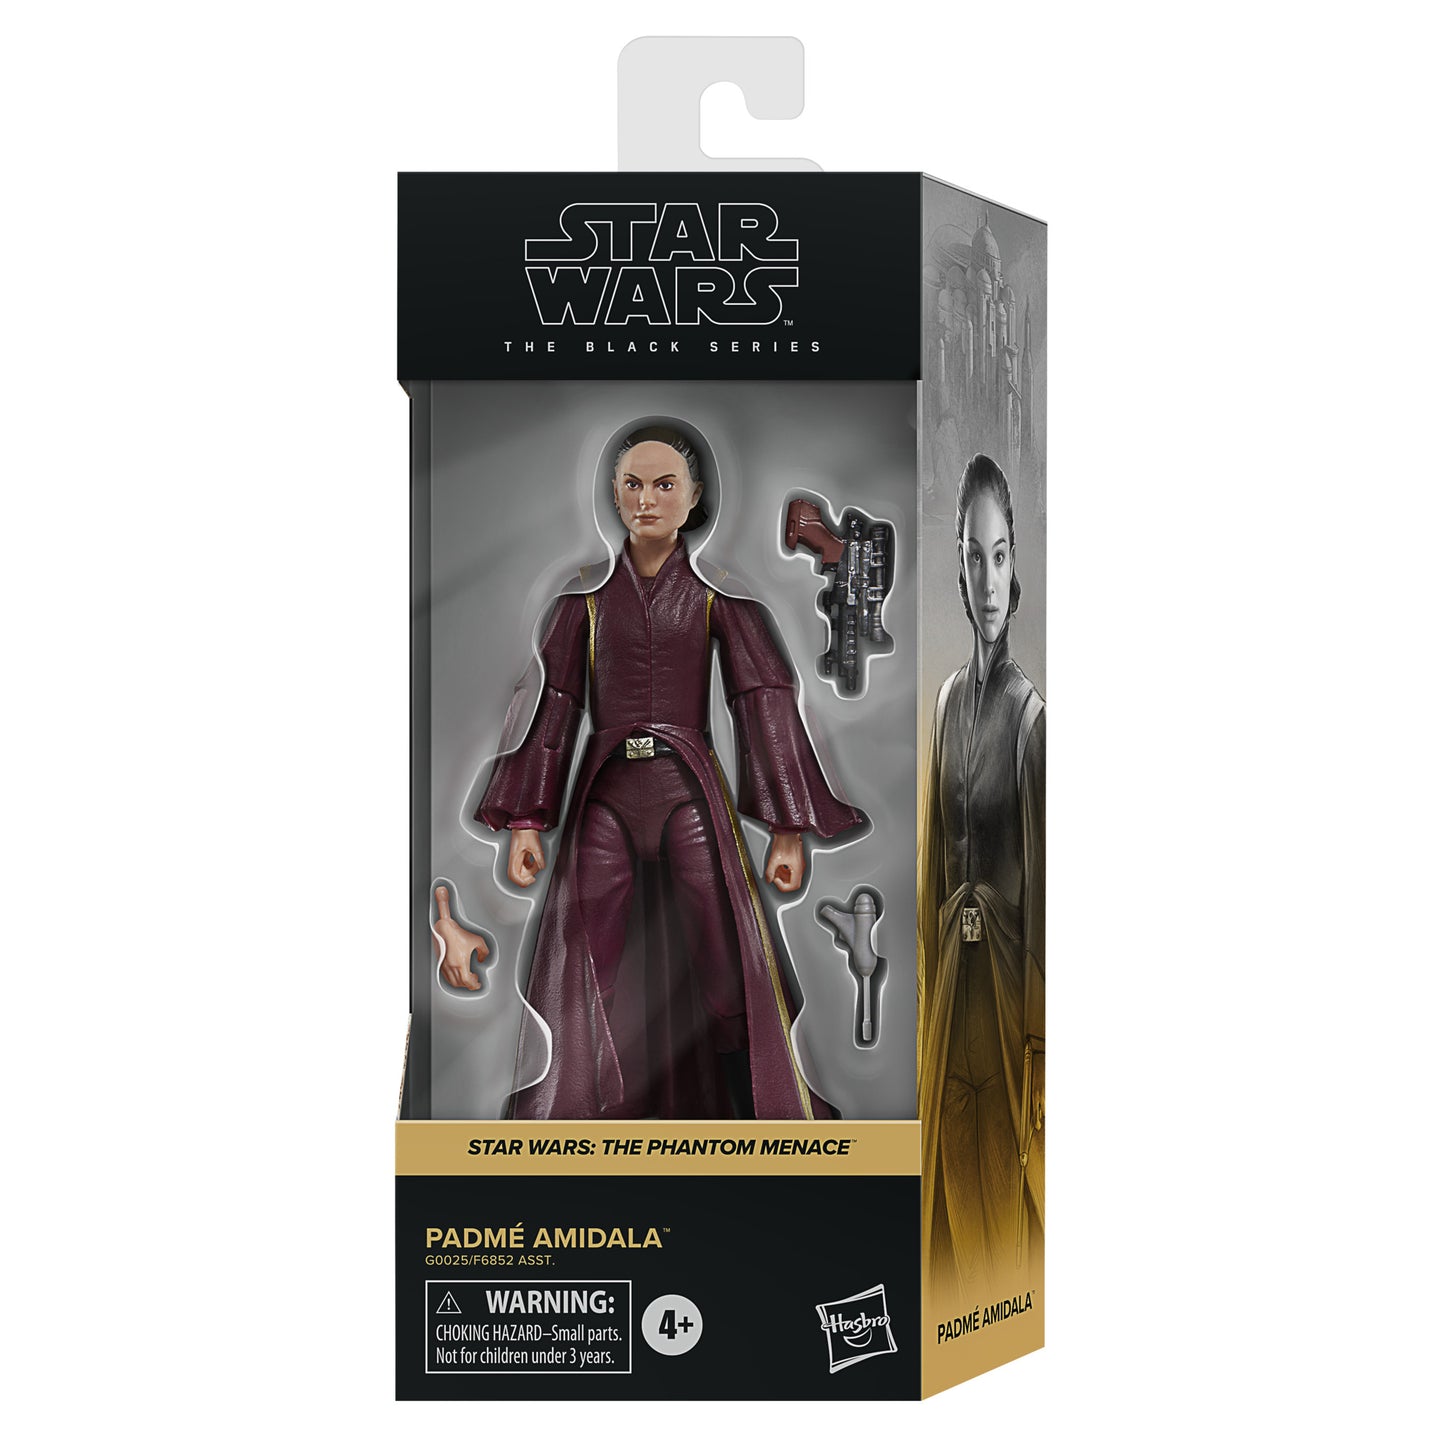 [PRE-ORDER] Star Wars The Black Series Padmé Amidala, Star Wars: The Phantom Menace Collectible 6 Inch Action Figure, Ages 4 and Up